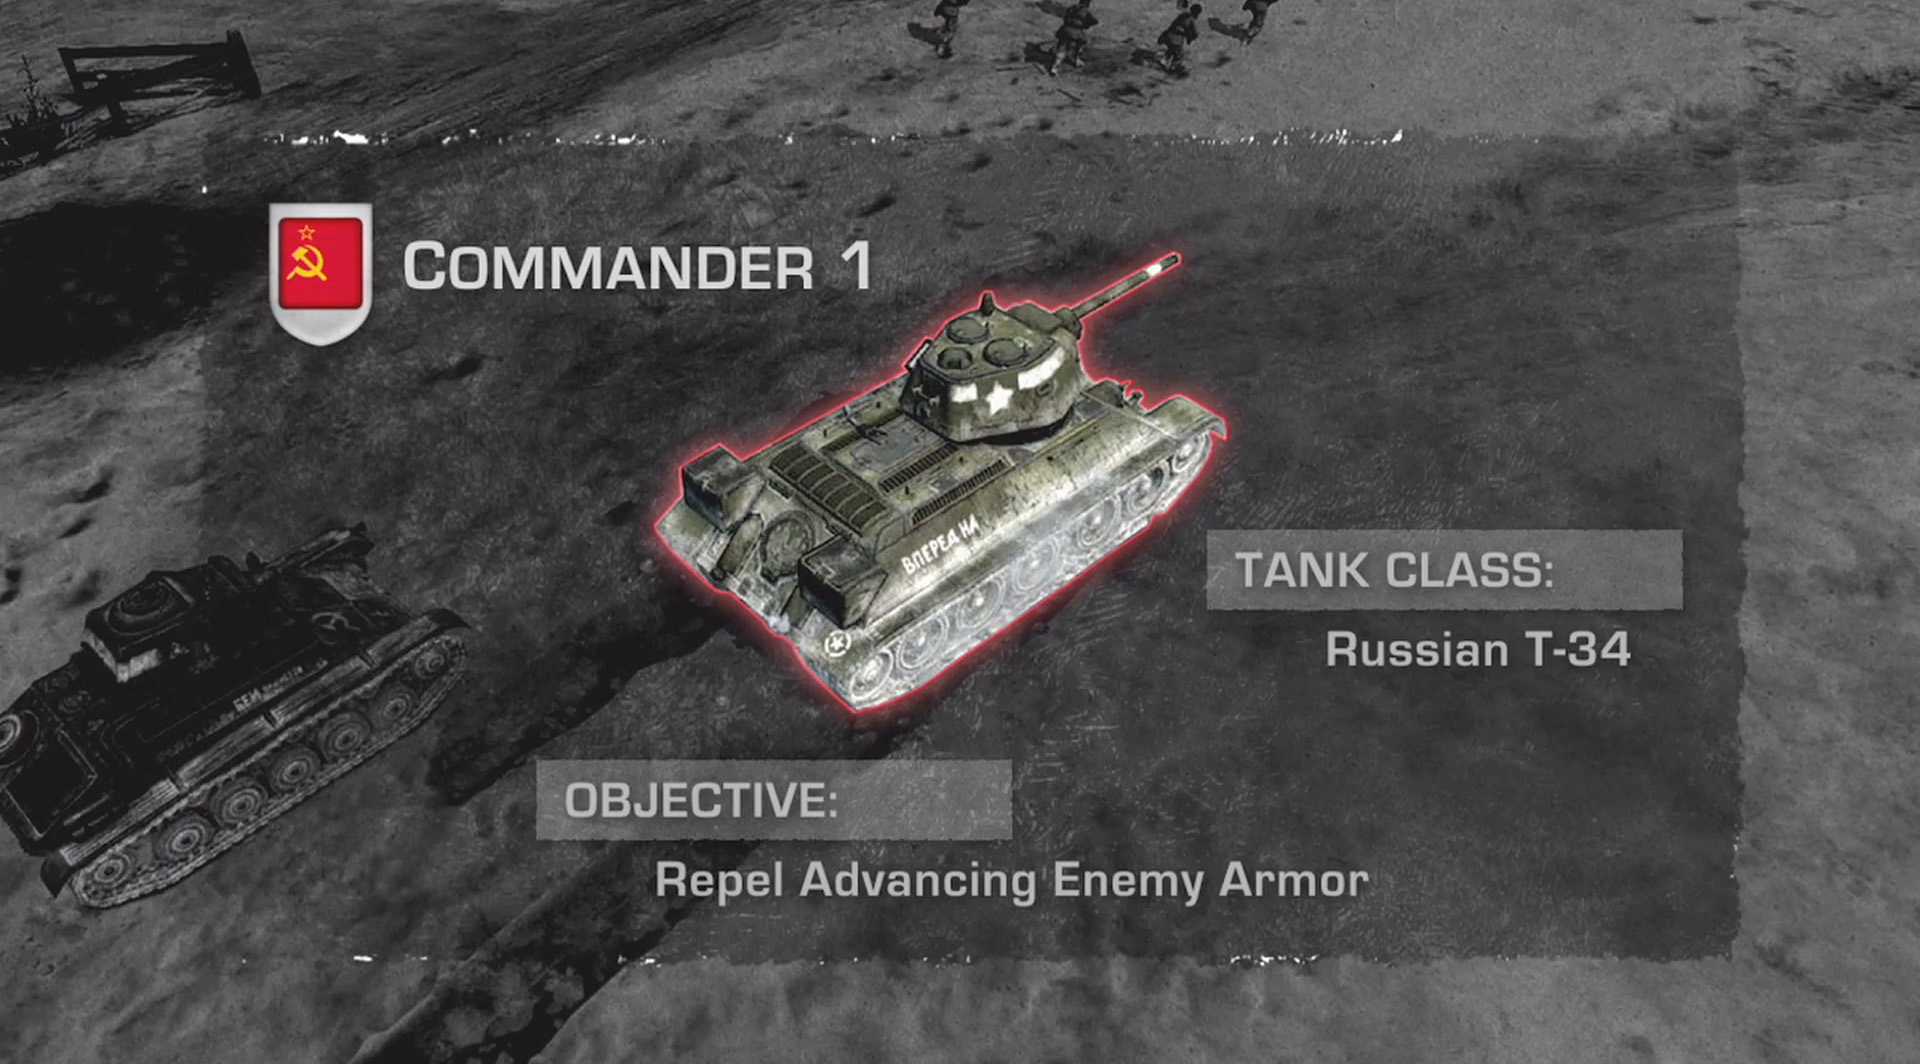 company of heroes 1 mod have all vehicles available per side